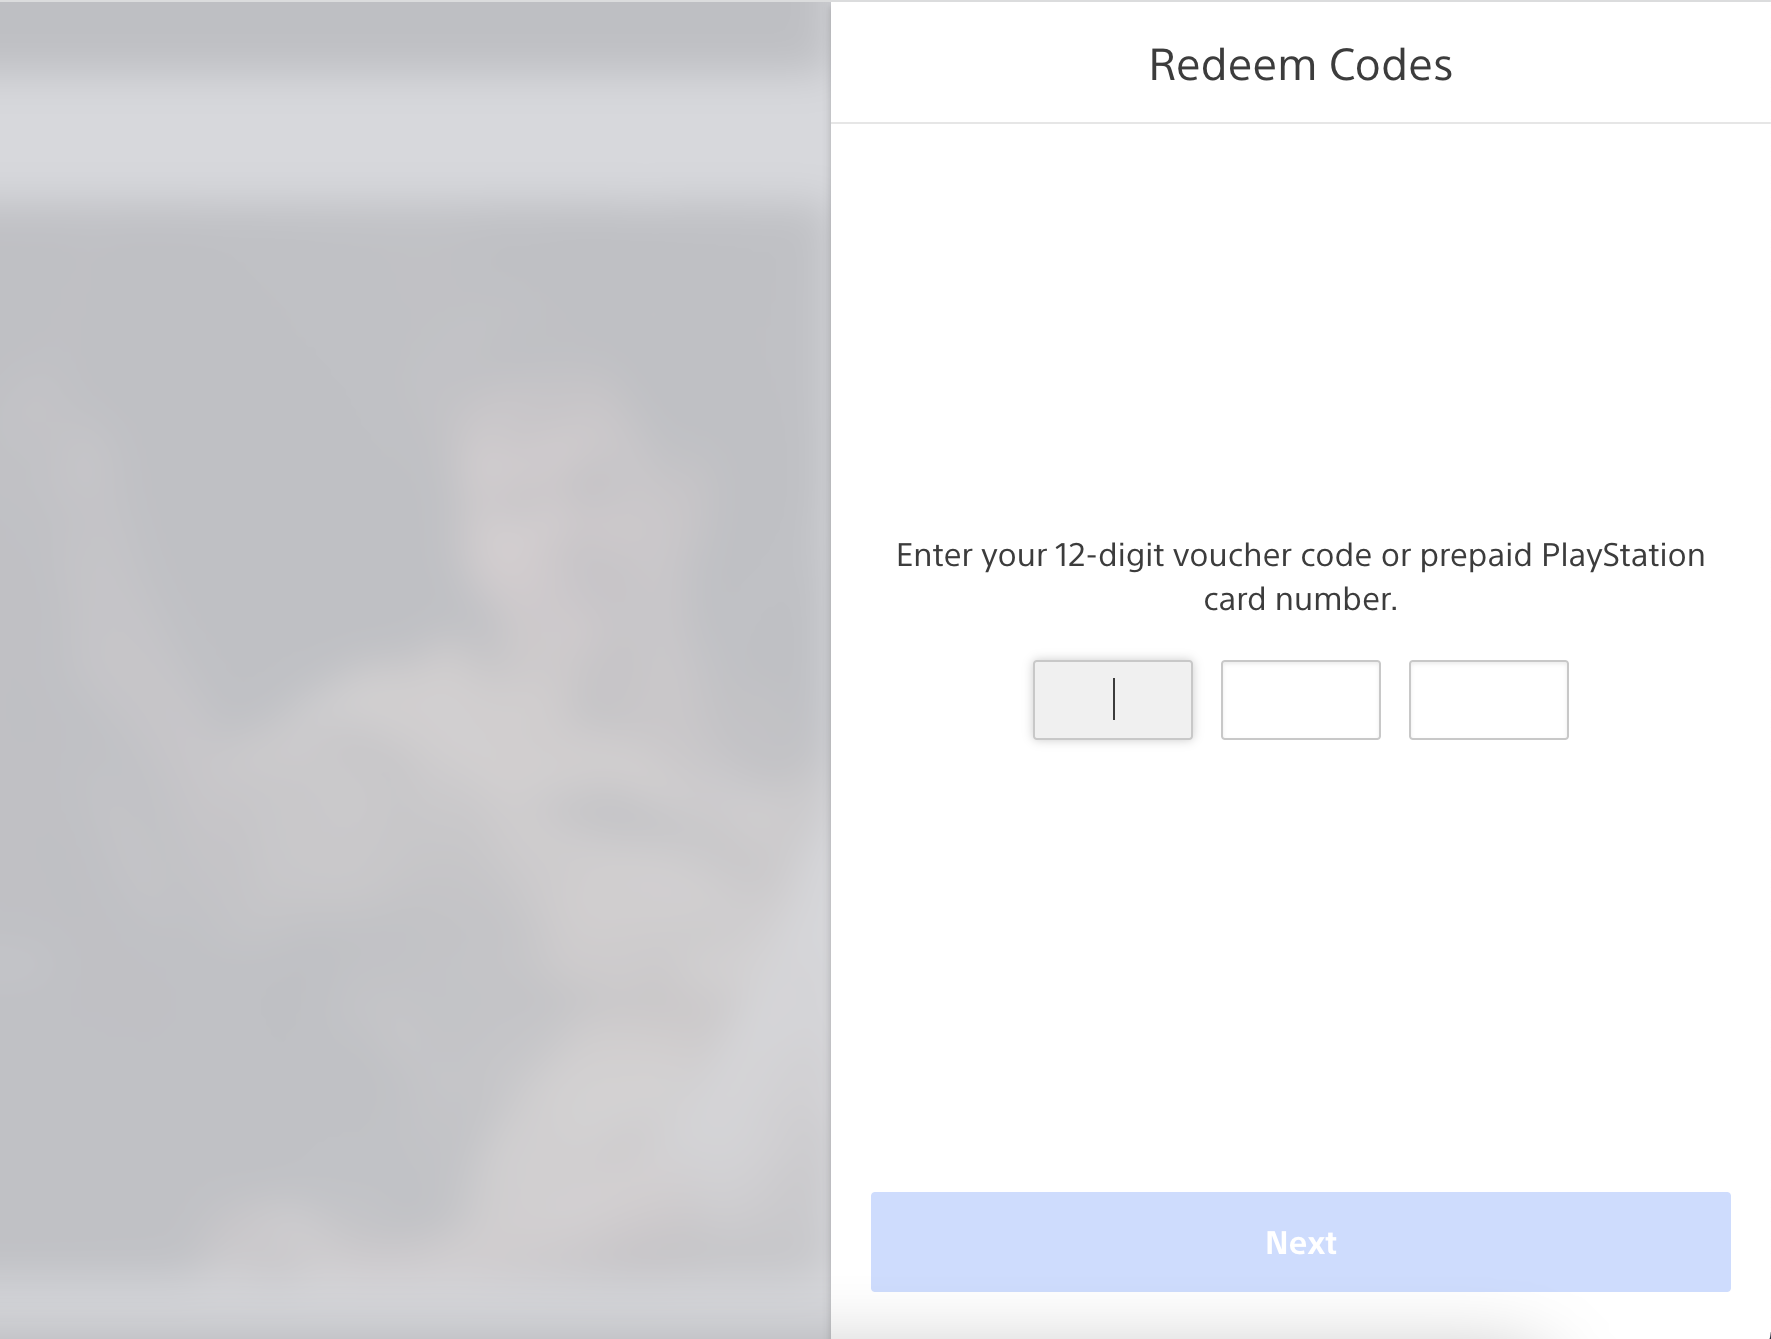 Screenshot of the code redemption pop-up on the PlayStation site